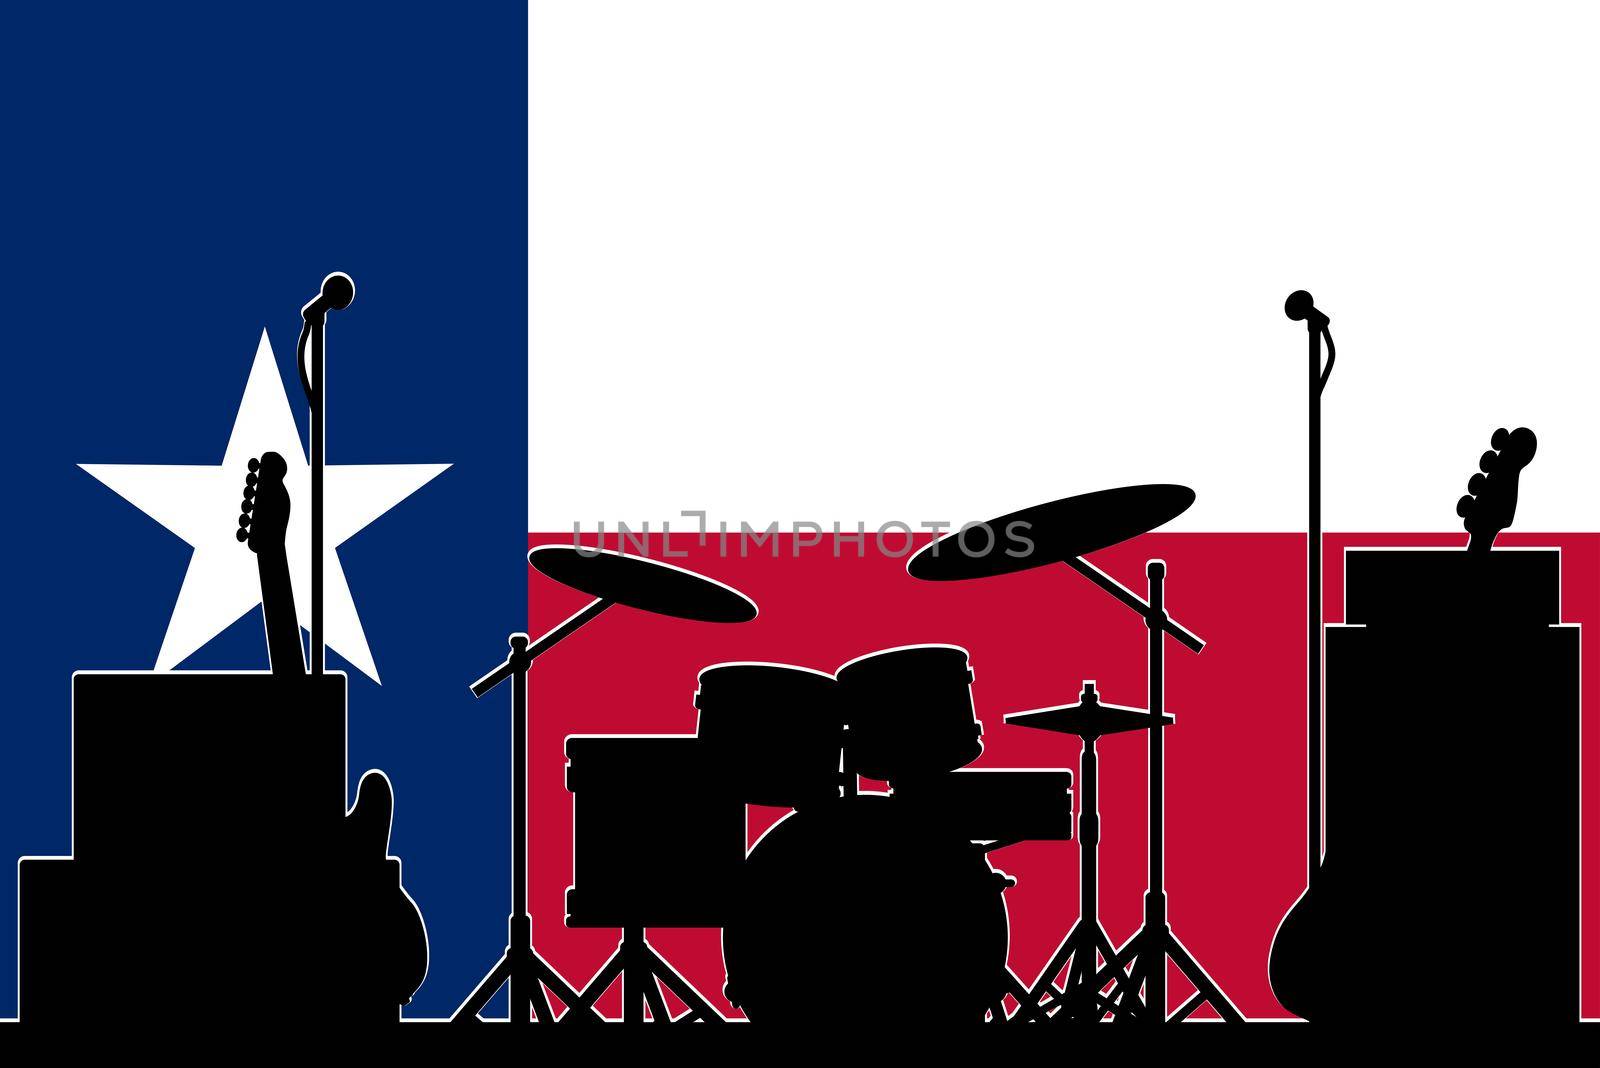 The flag of the USA state of TEXAS as a background to a bands equipment